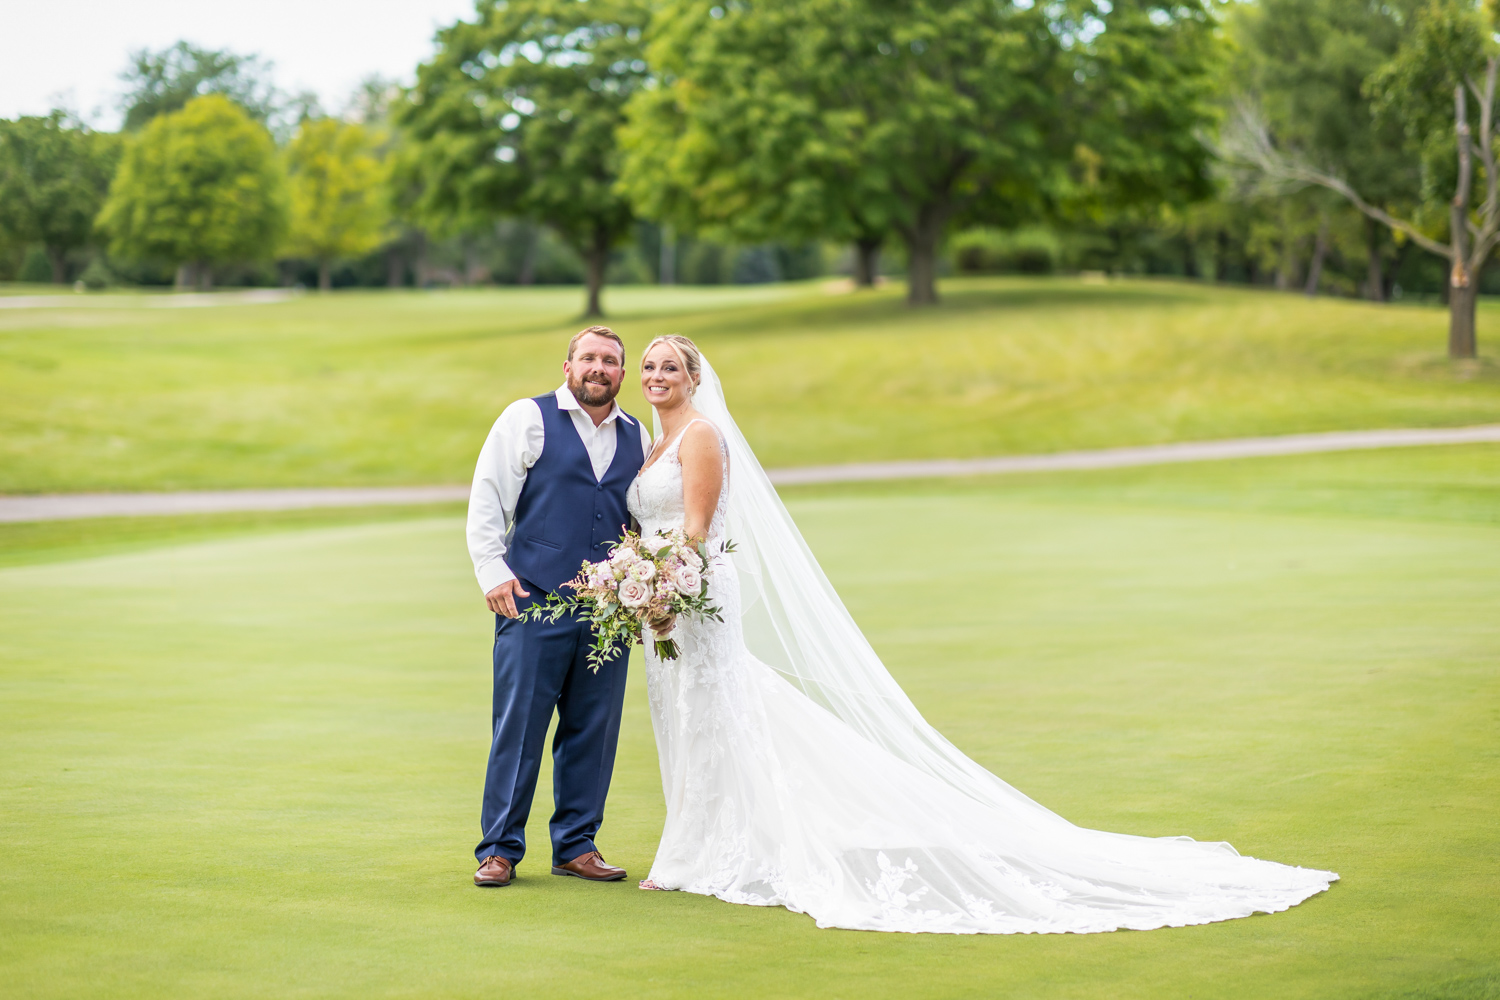 A new couple posing on their wedding day on a field of greens with trees in the background.